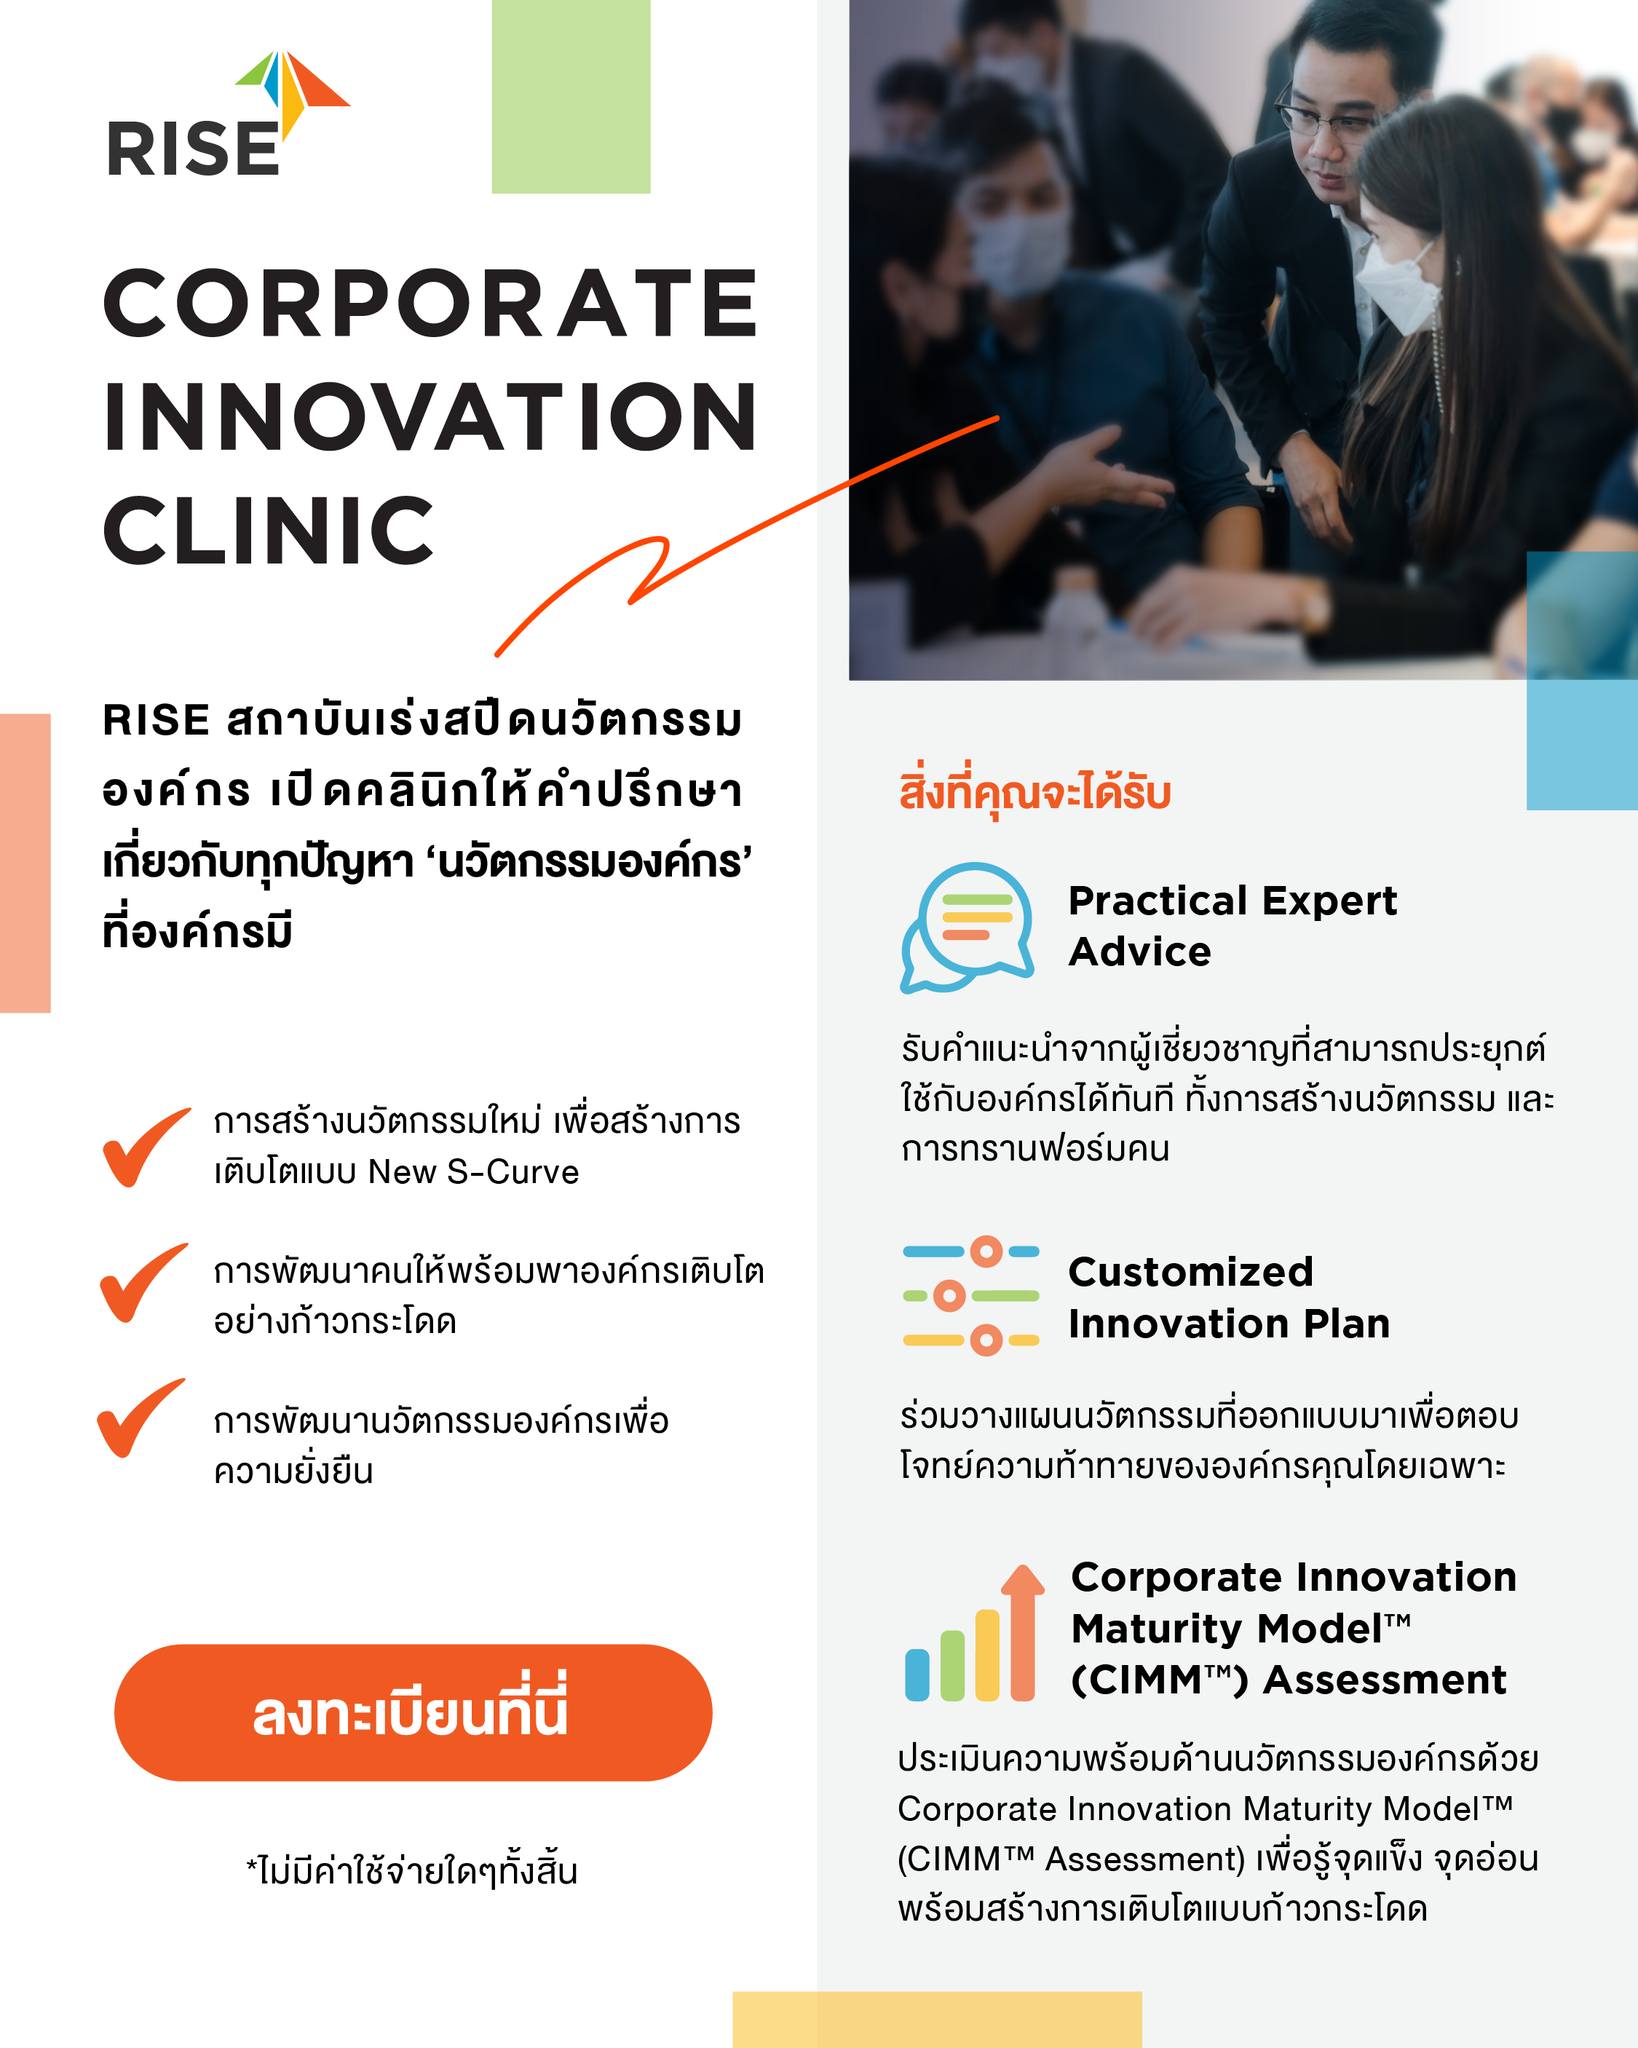 RISE Corporate Innovation Clinic